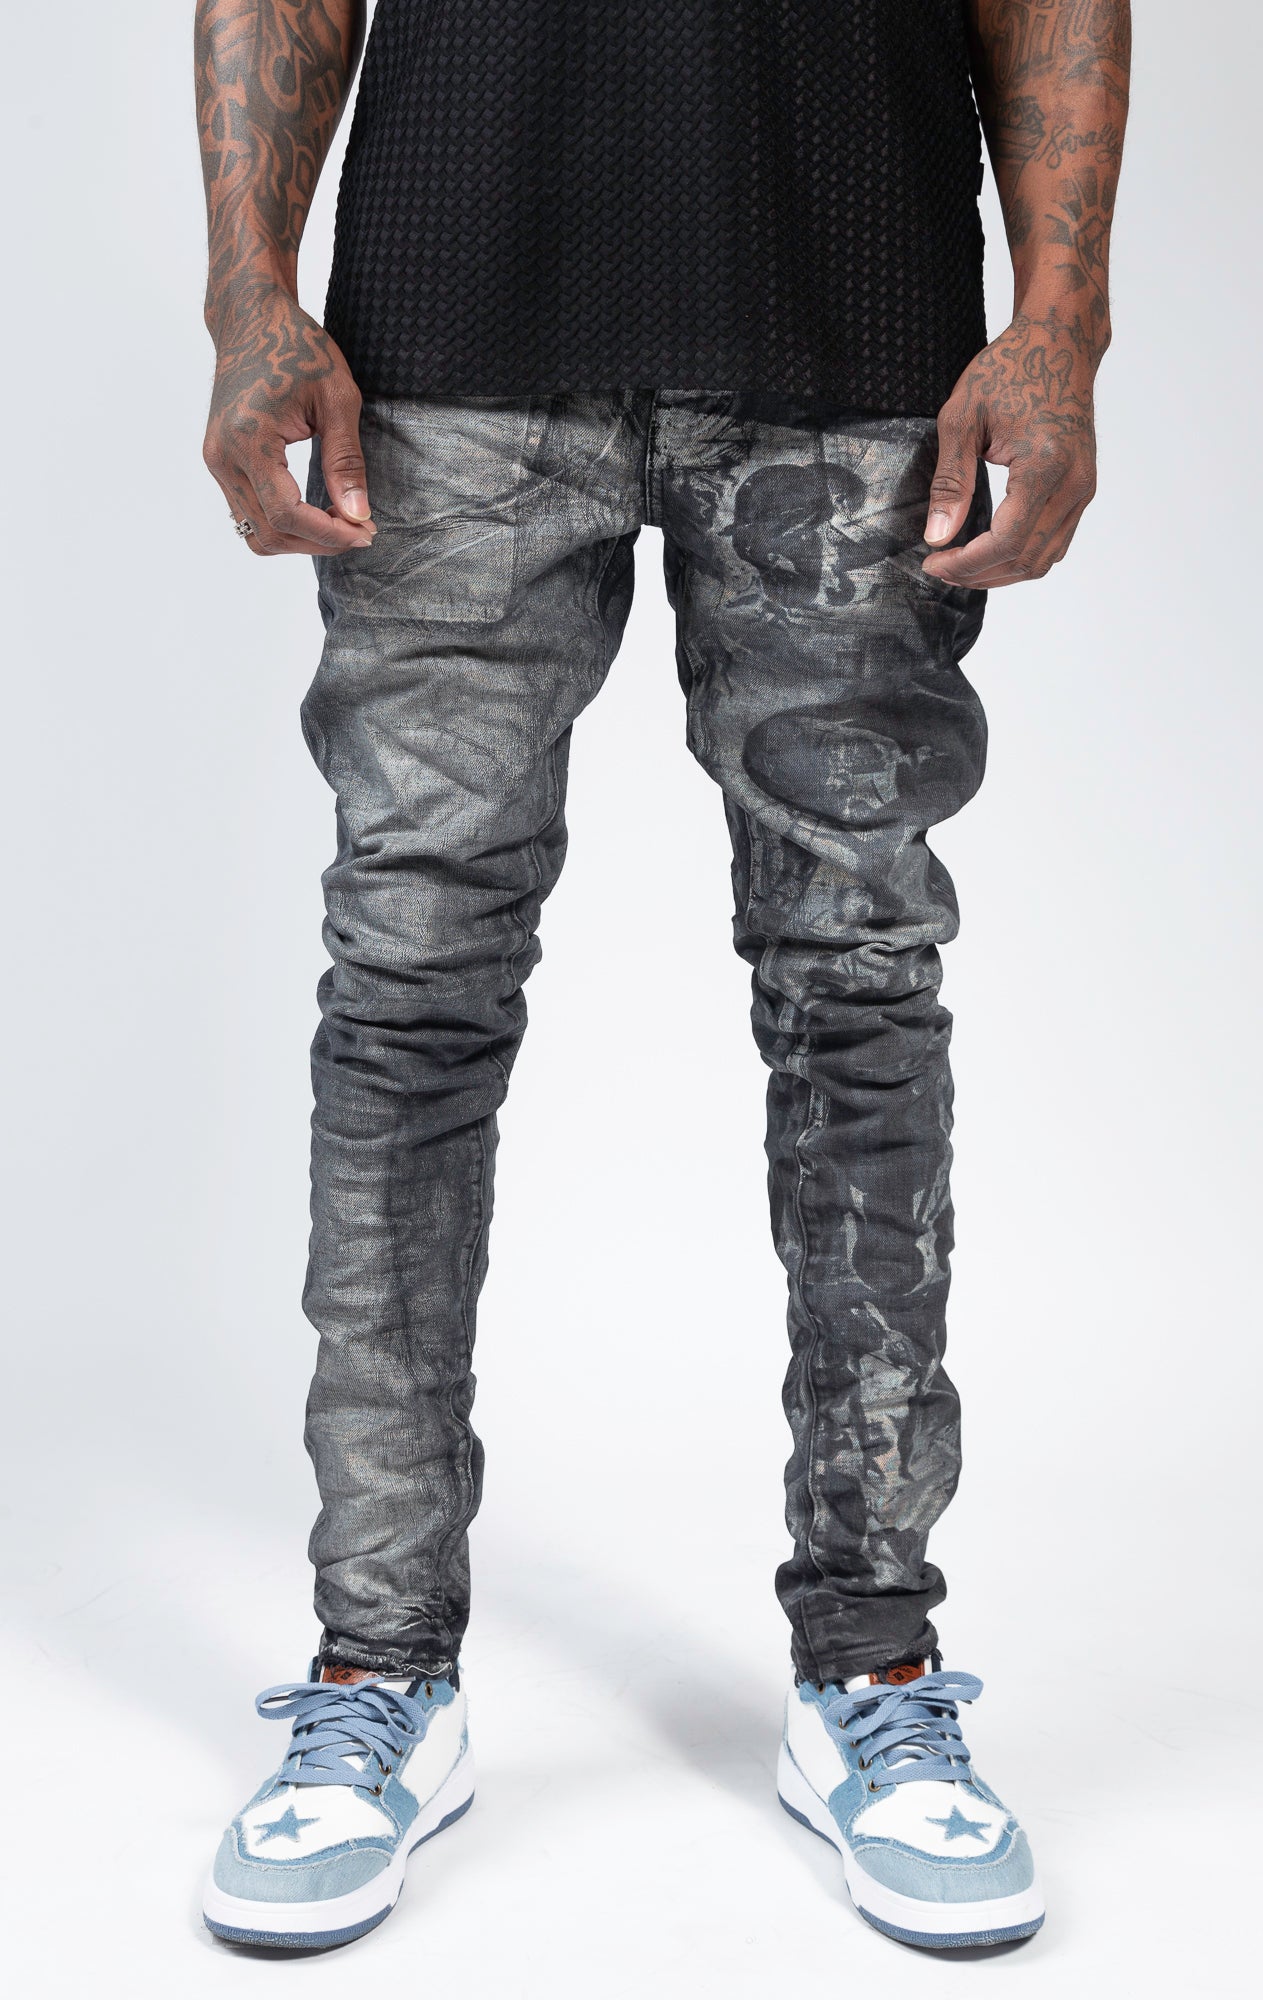 Black jean wash low-rise skinny jeans with distressed detailing